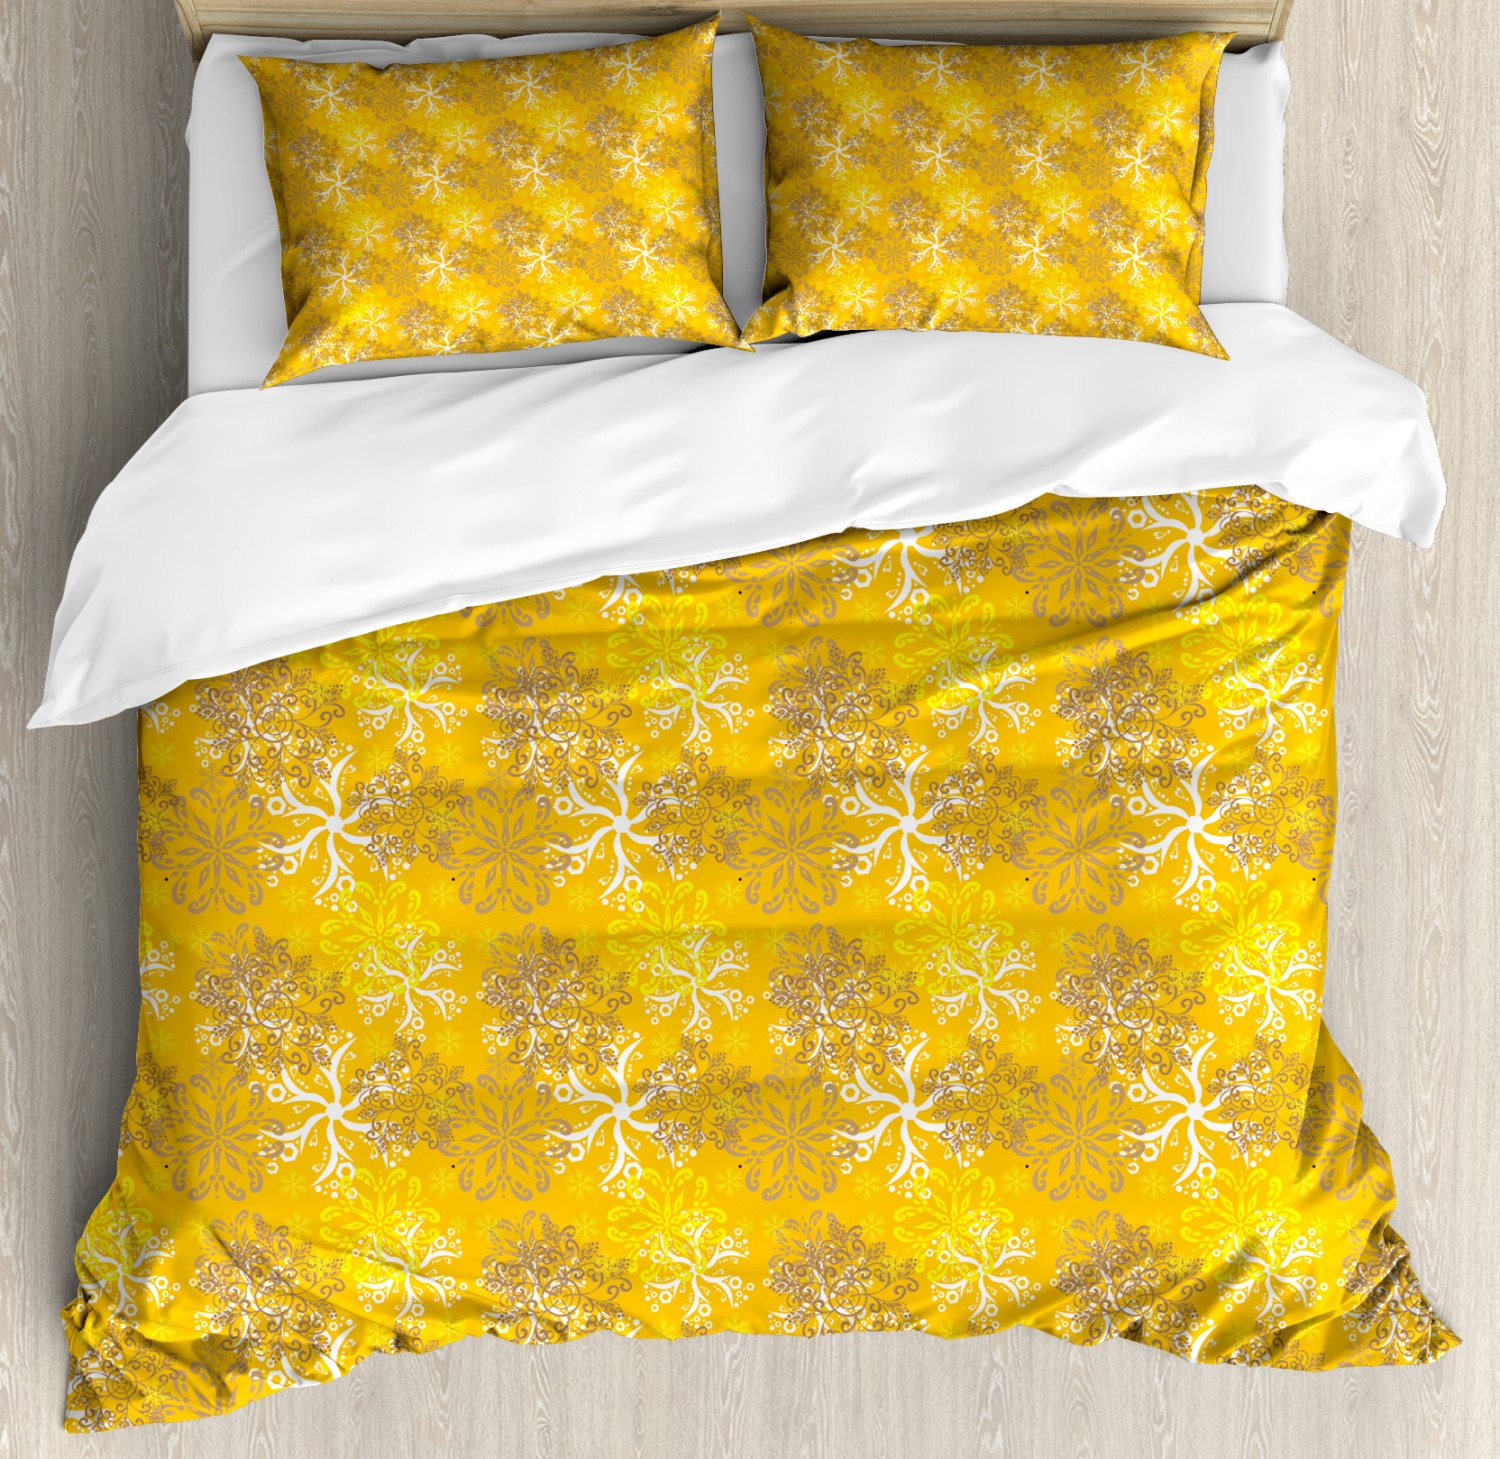 Yellow And White Duvet Cover Set With Pillow Shams Ornate Design